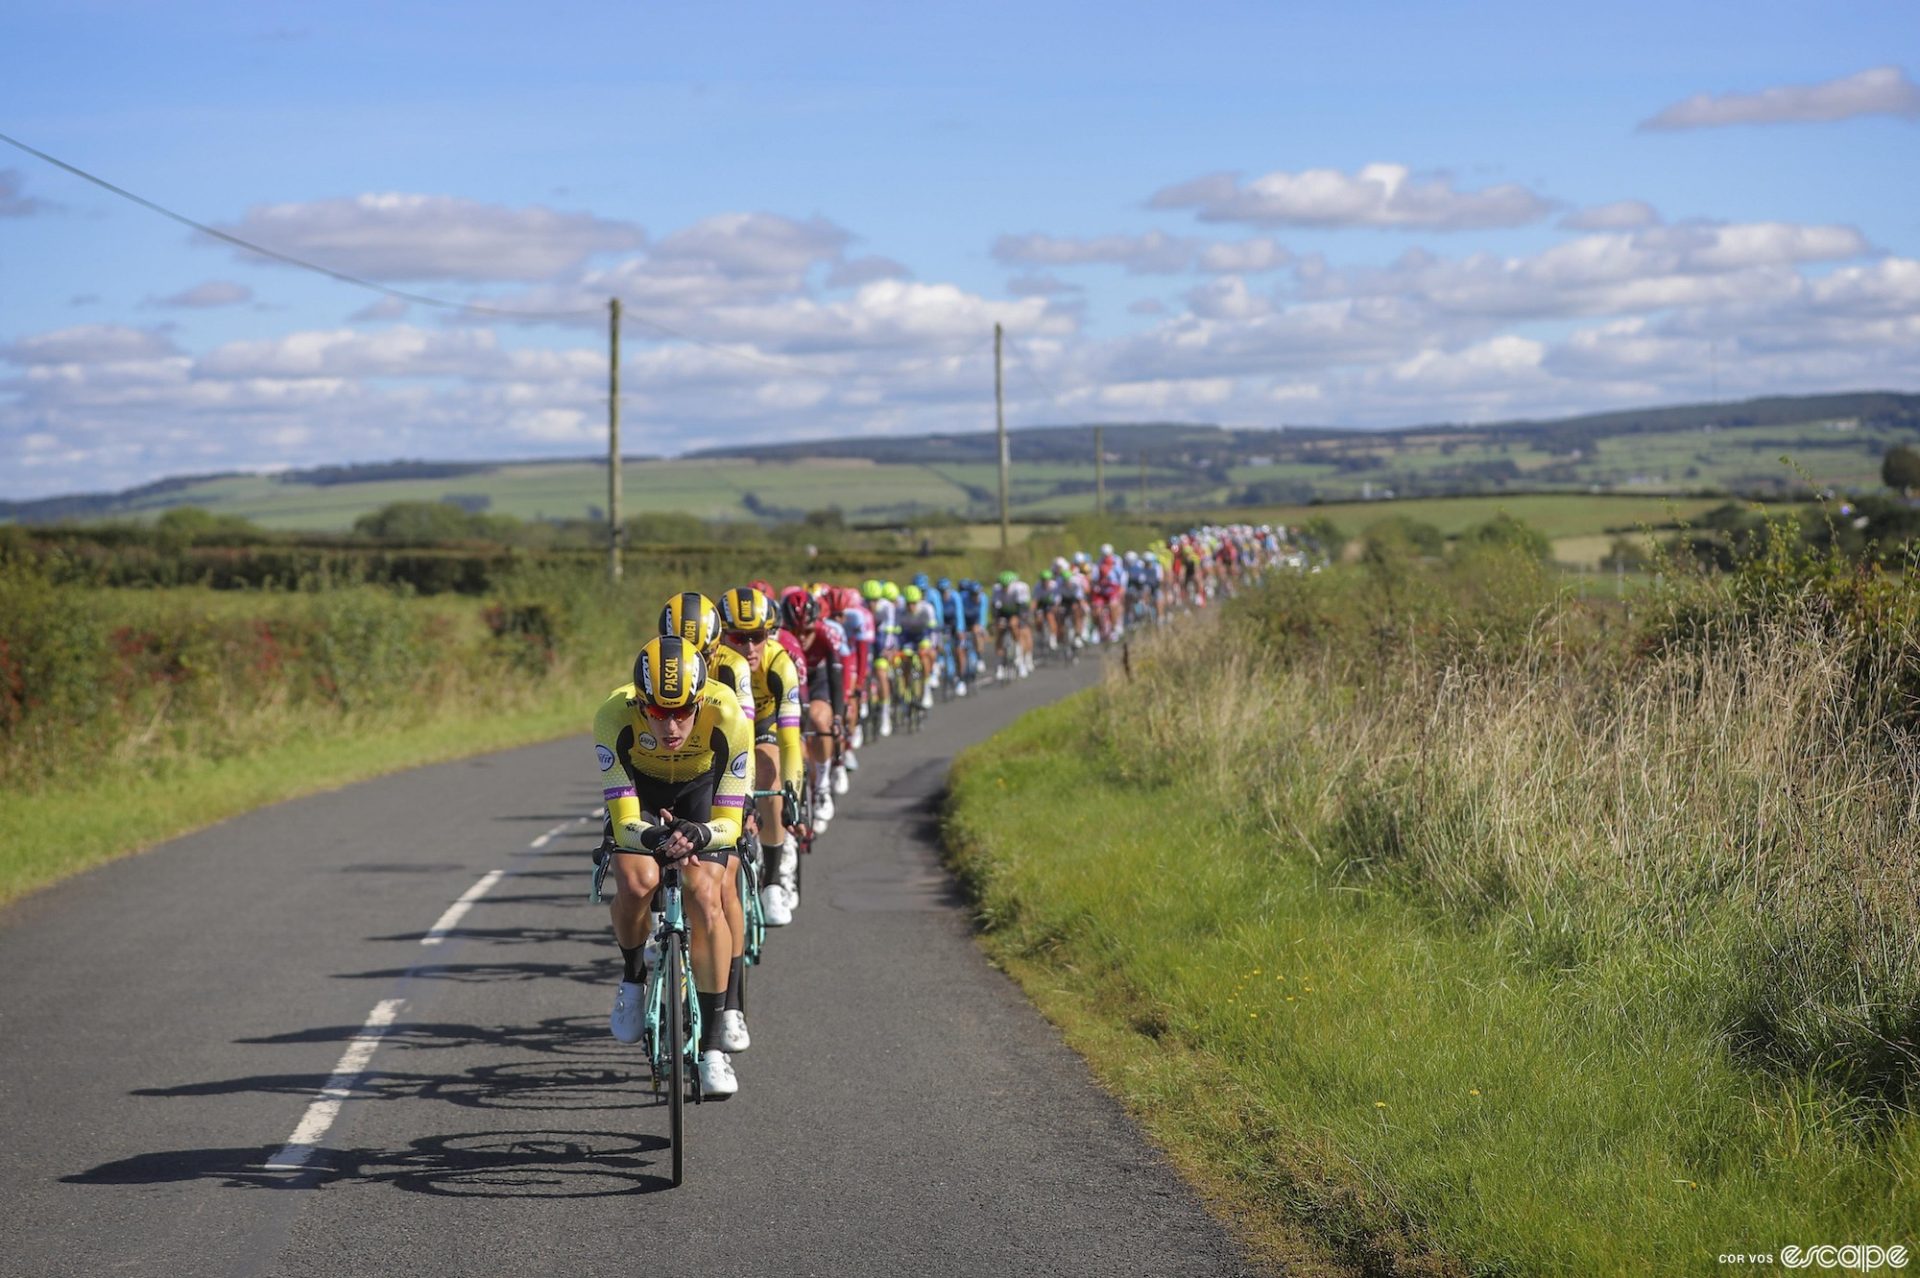 Jumbo-Visma leads the pack through a landscape of green fields in southwestern Scotland during stage 1 of the 2019 Tour of Britain